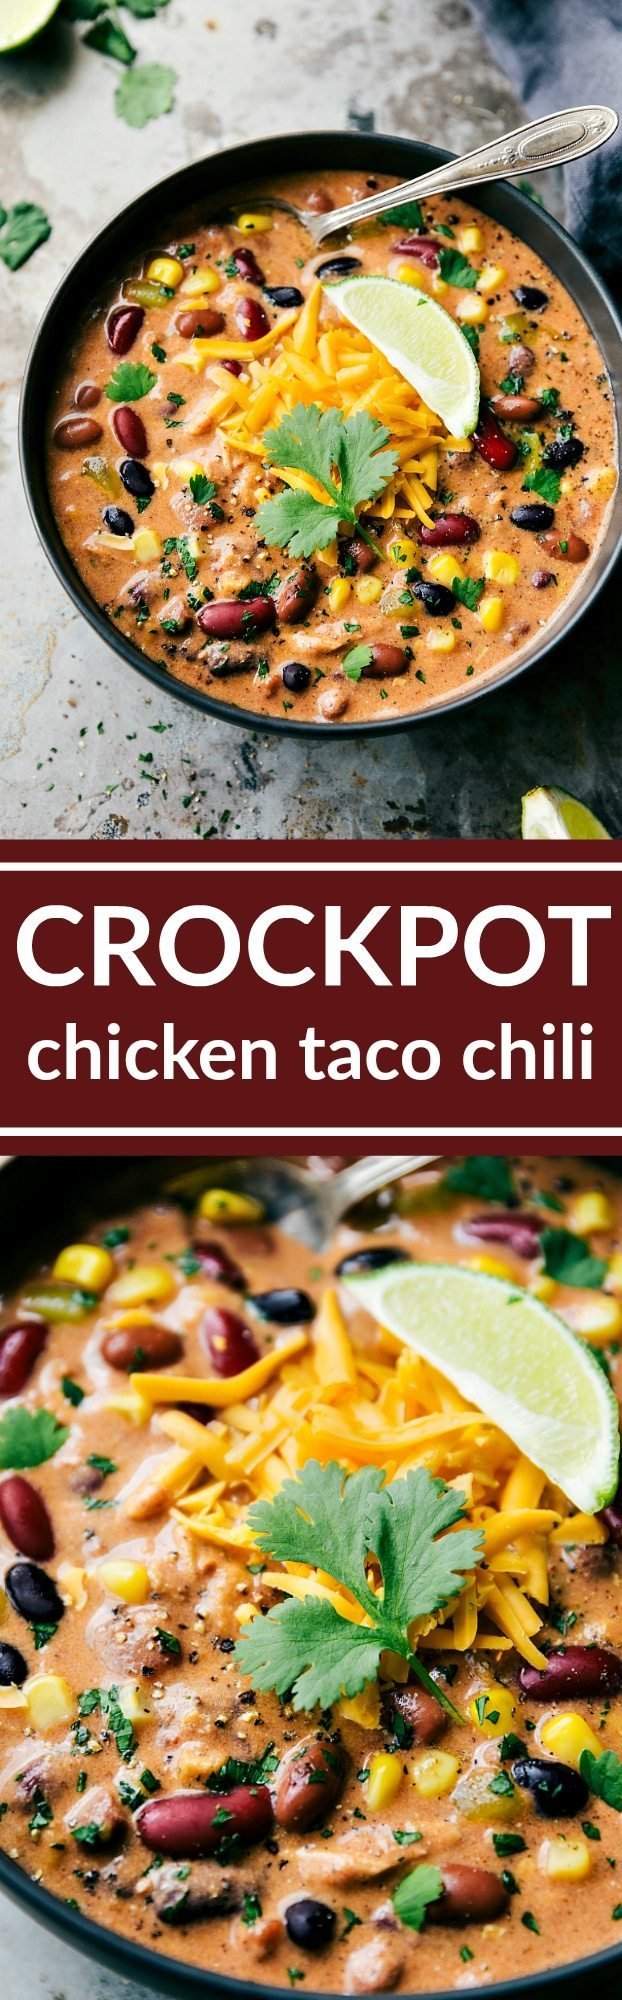 Dump it and forget about it crockpot creamy chicken taco chili with chicken, lots of beans and veggies, and plenty of good spice! via chelseasmessyapron.com